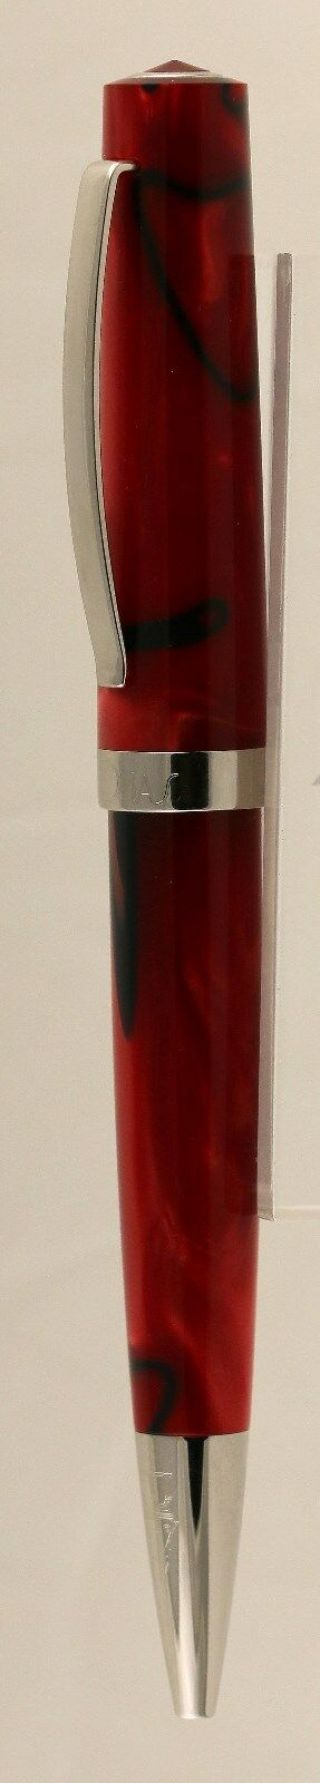 Estate Find Omas Red Marble Ballpoint Pen